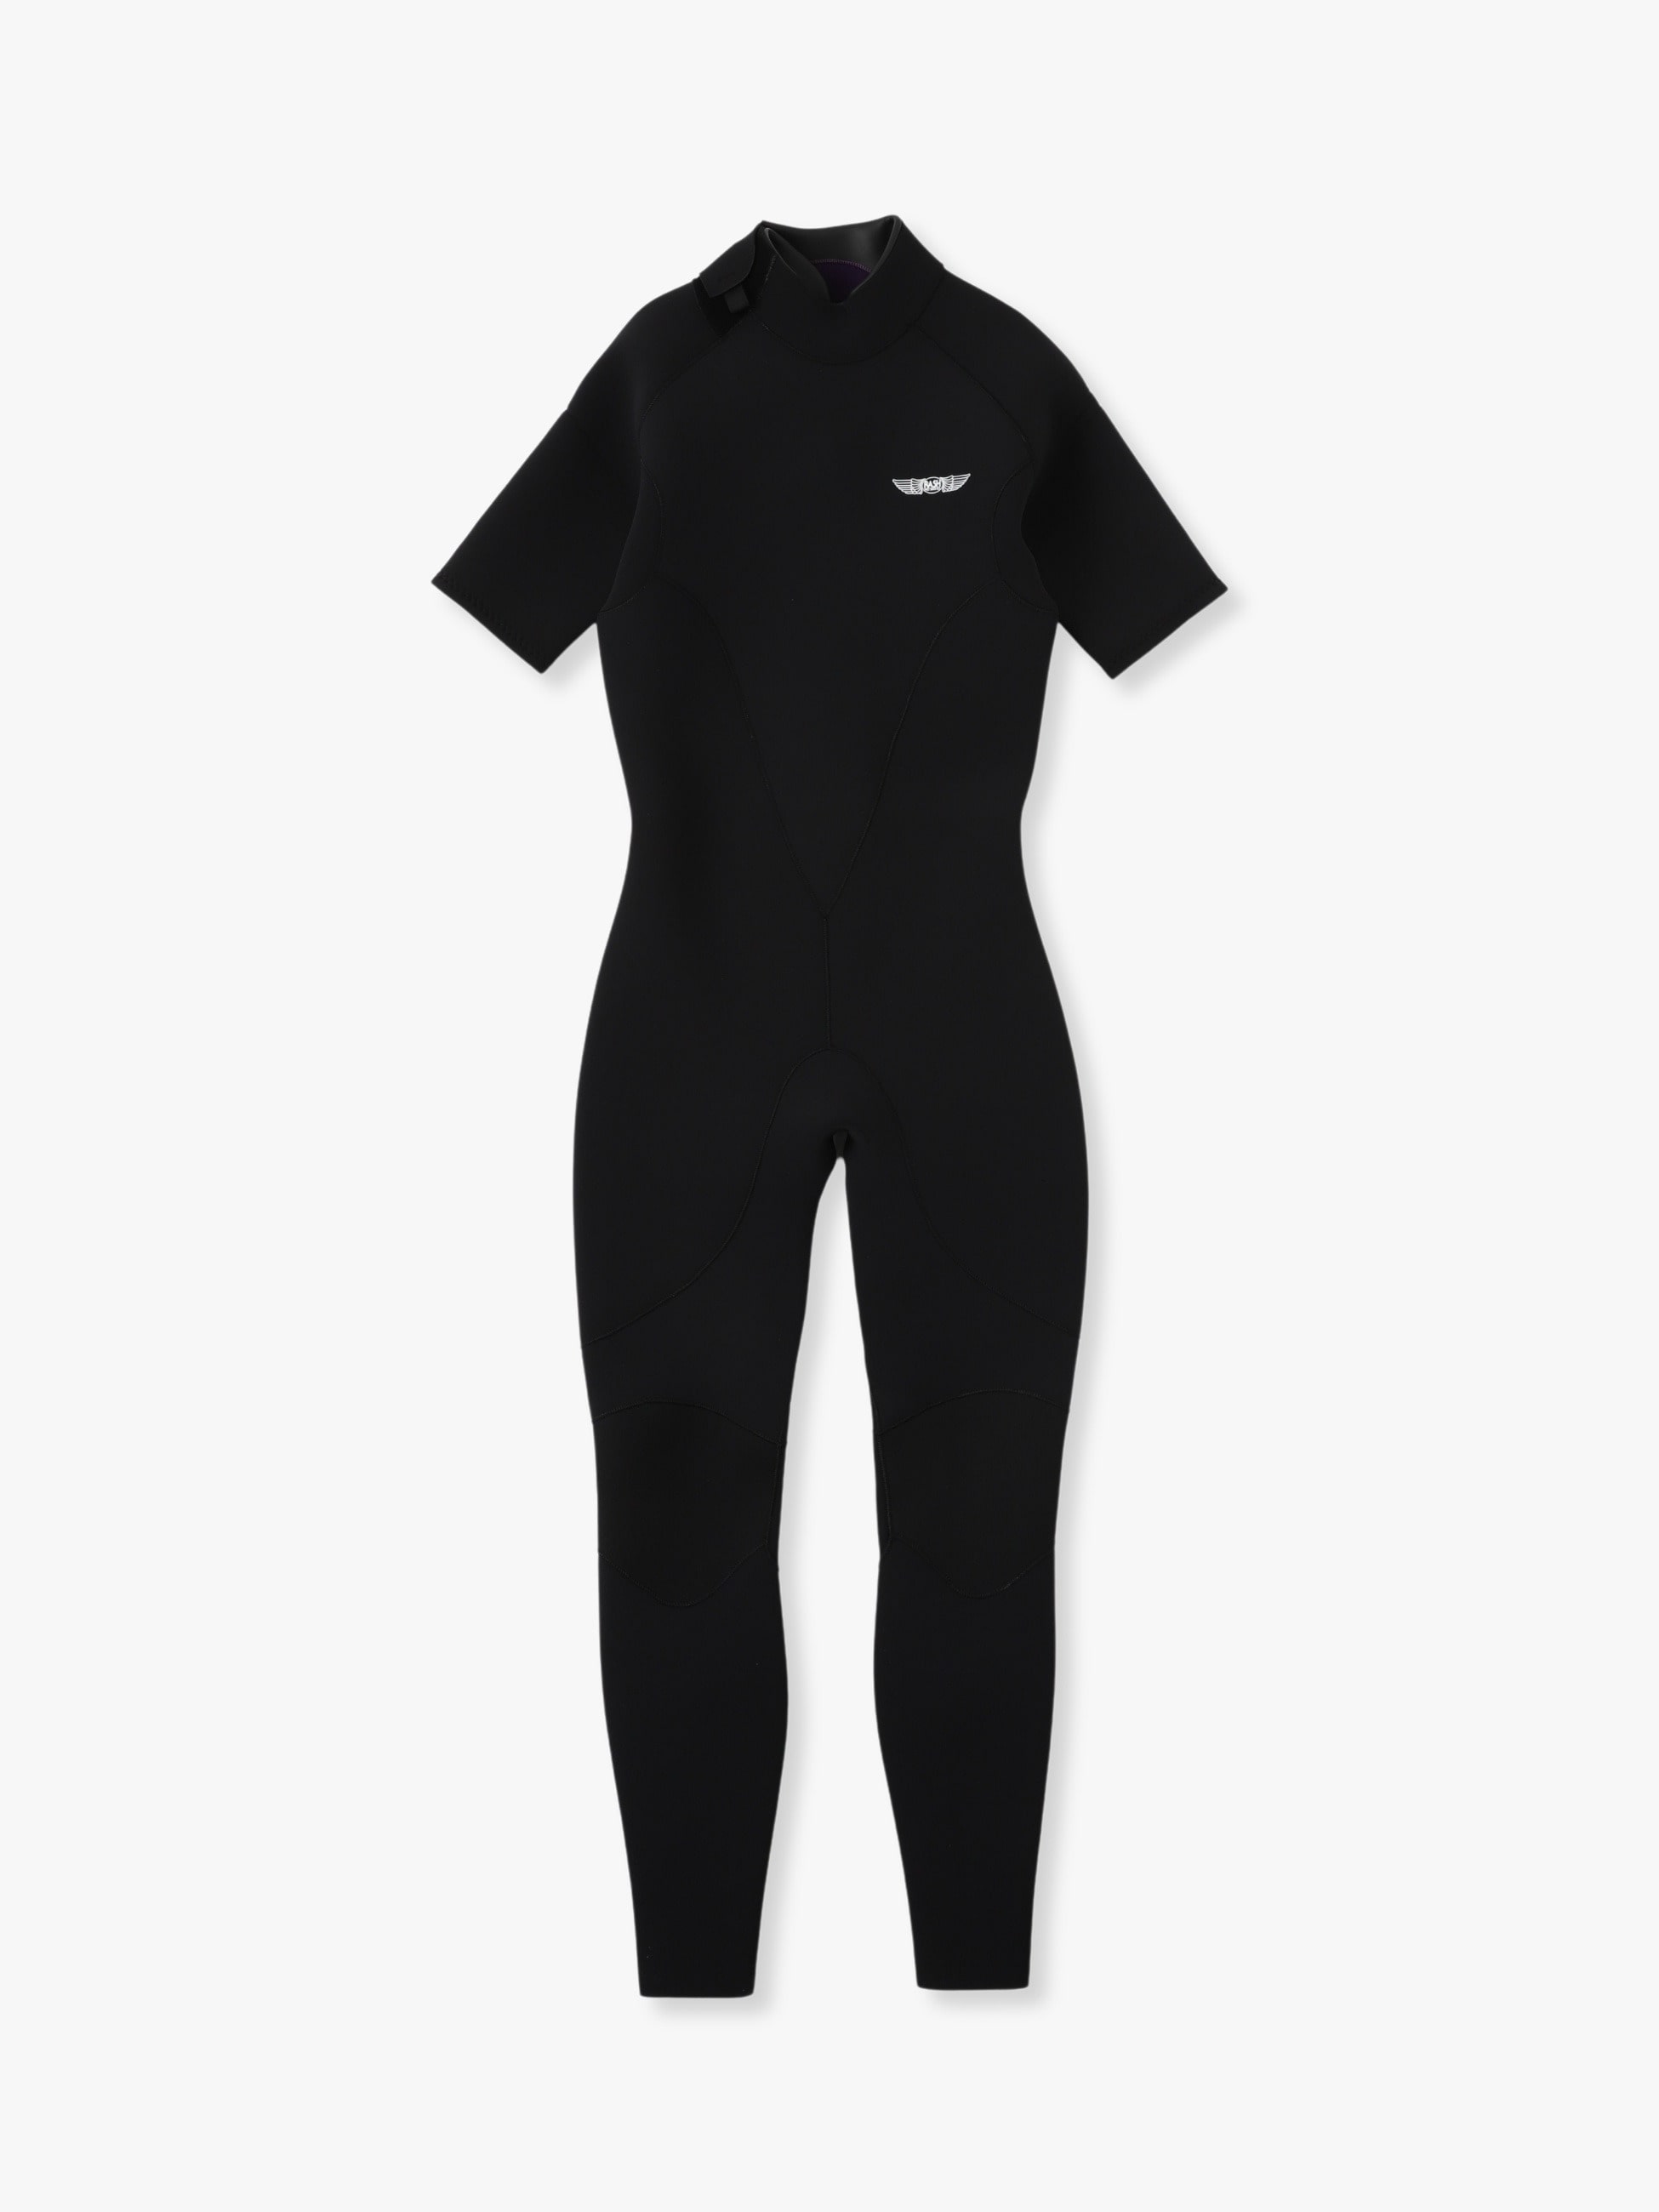 Classic-S Spring Junkie Wetsuits 詳細画像 black 1